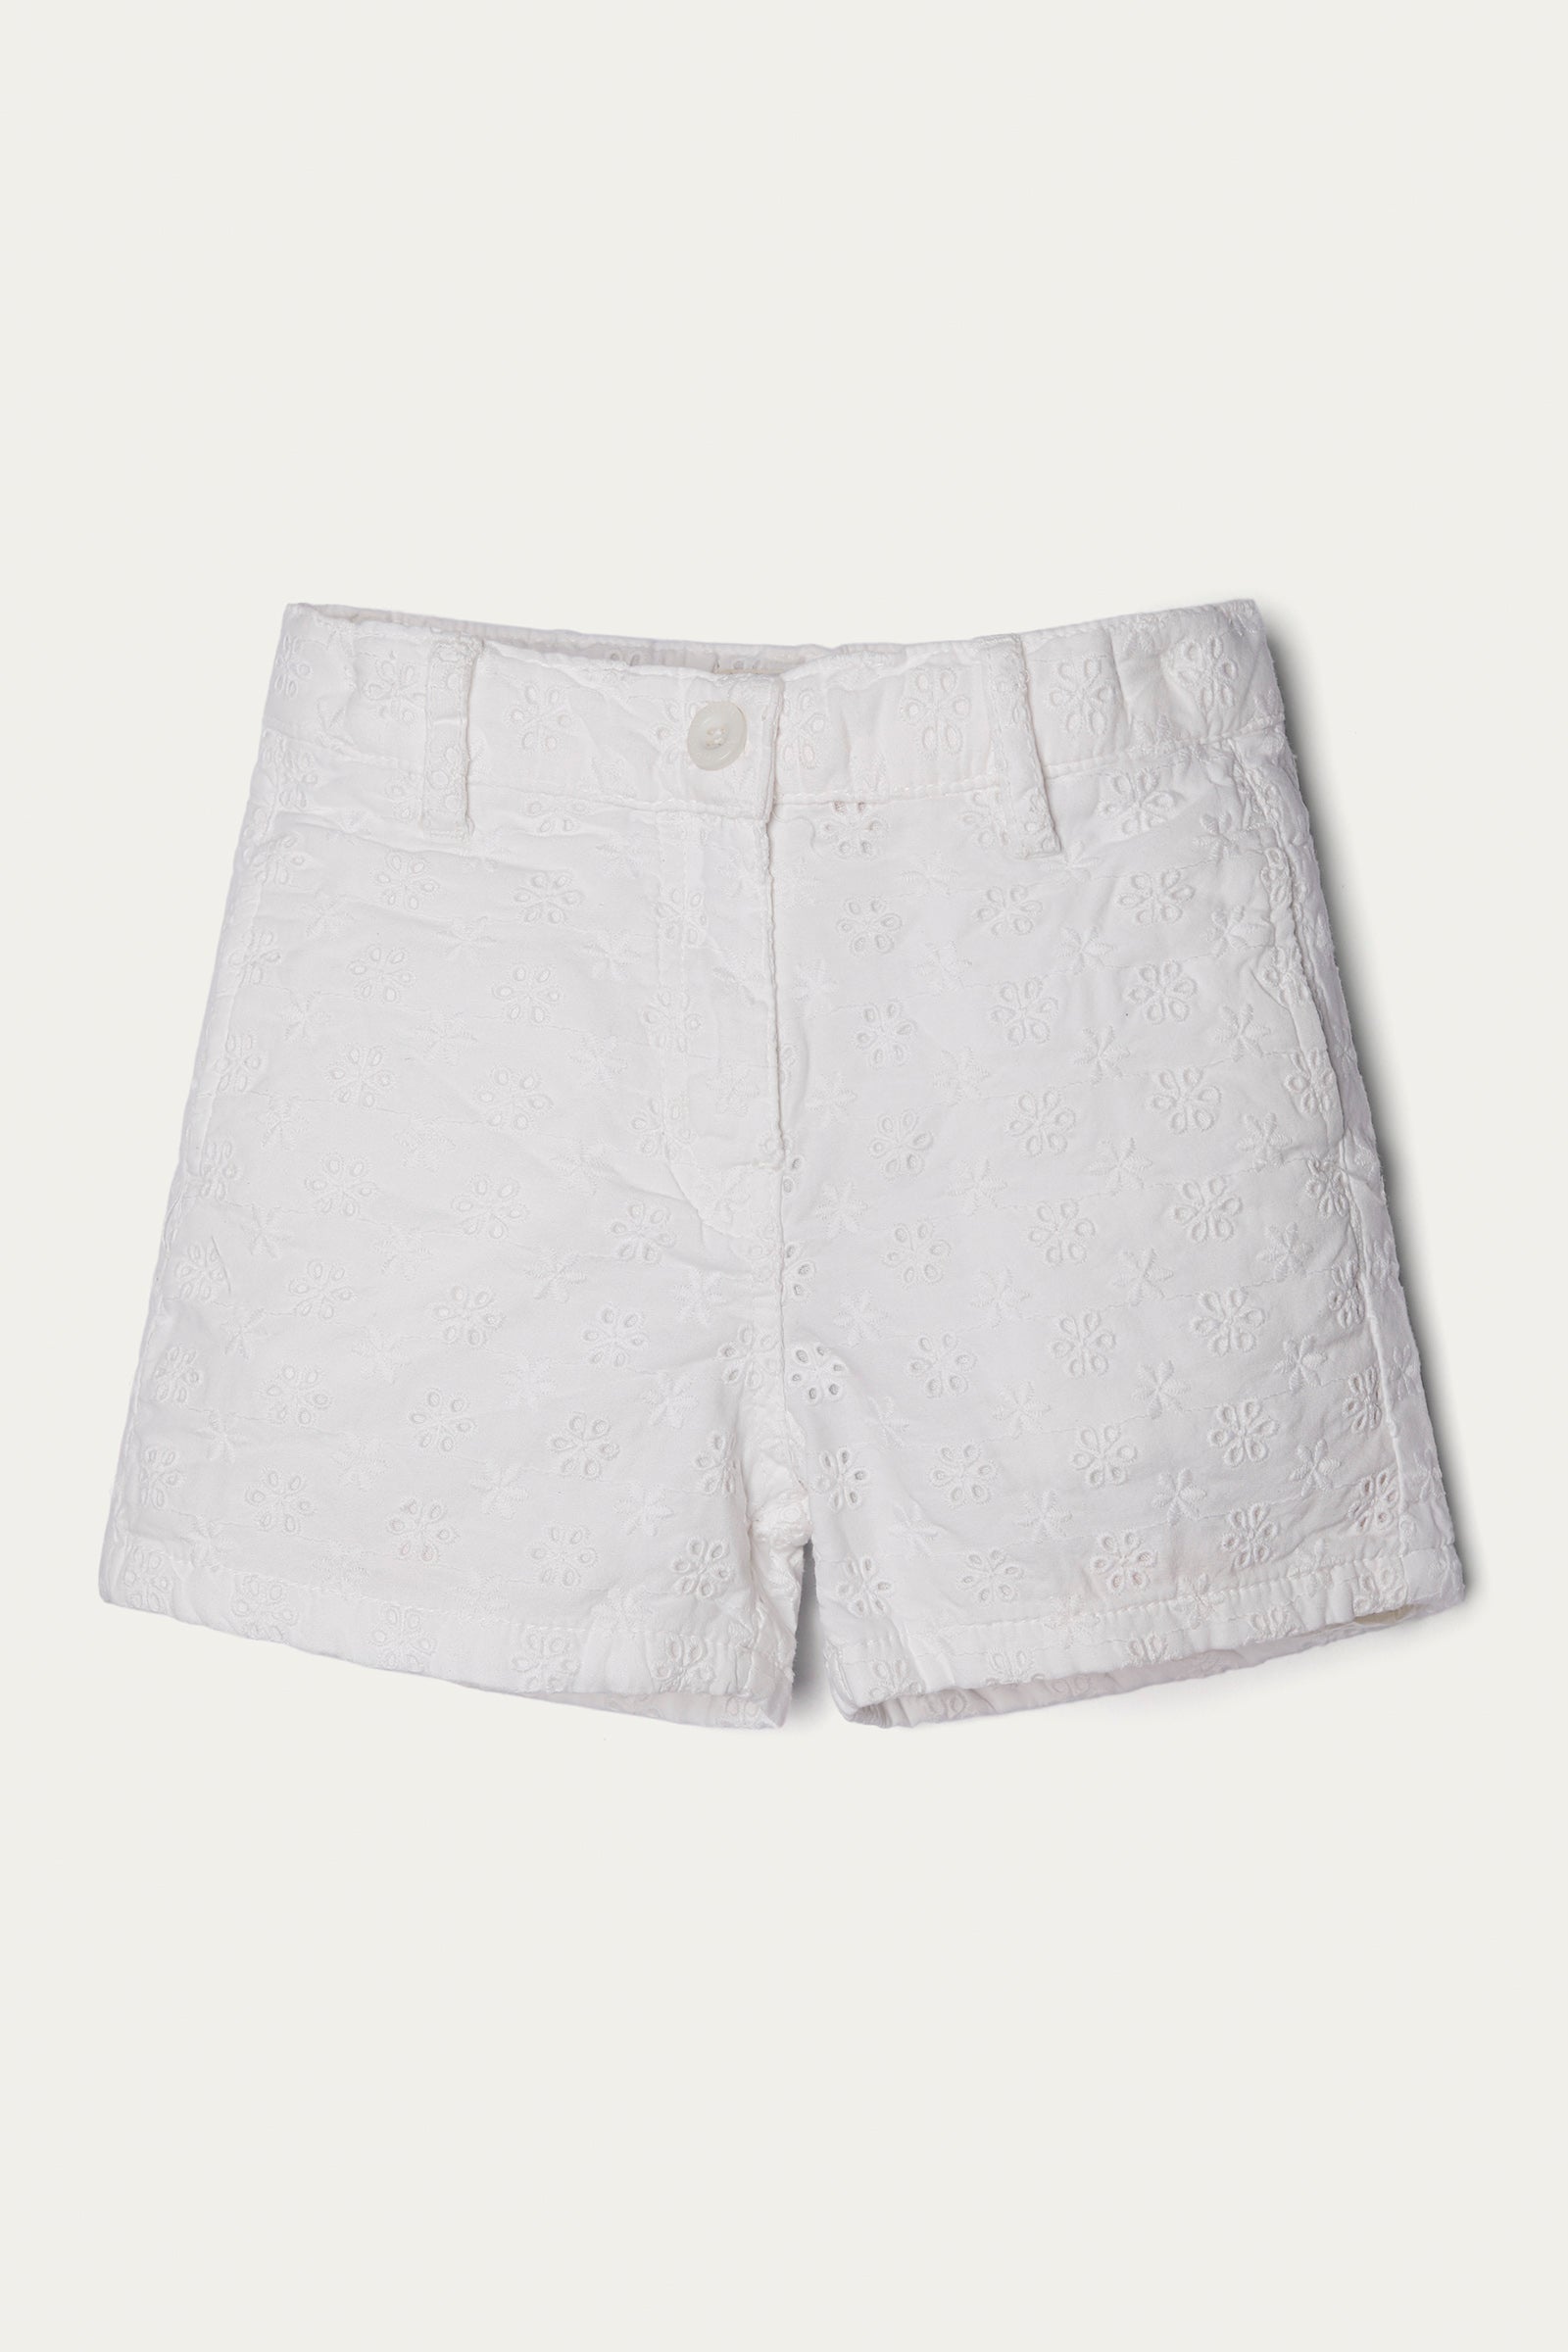 Embroidered Shorts (GSH-146)